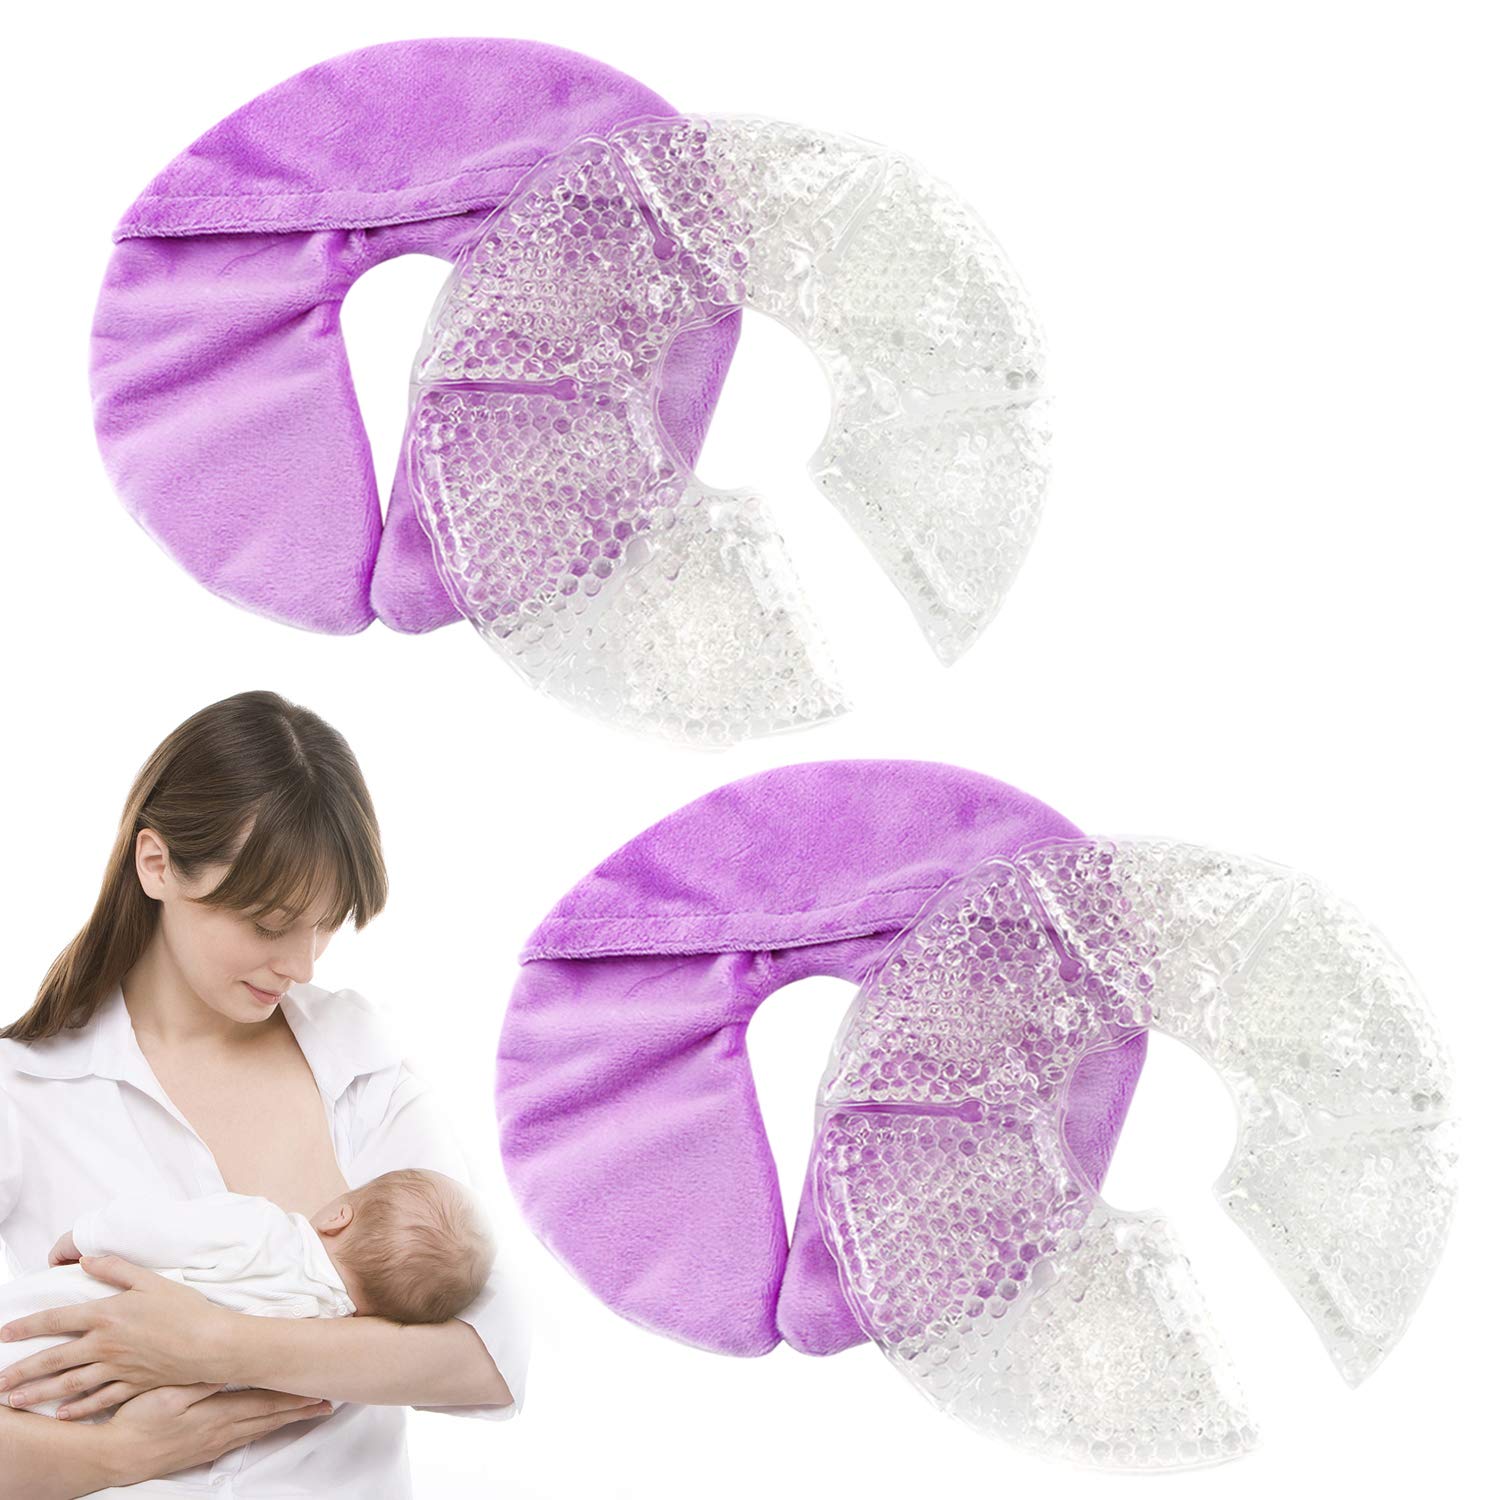 Economical Excellence Breast Therapy Ice Pack, Breastfeeding Gel